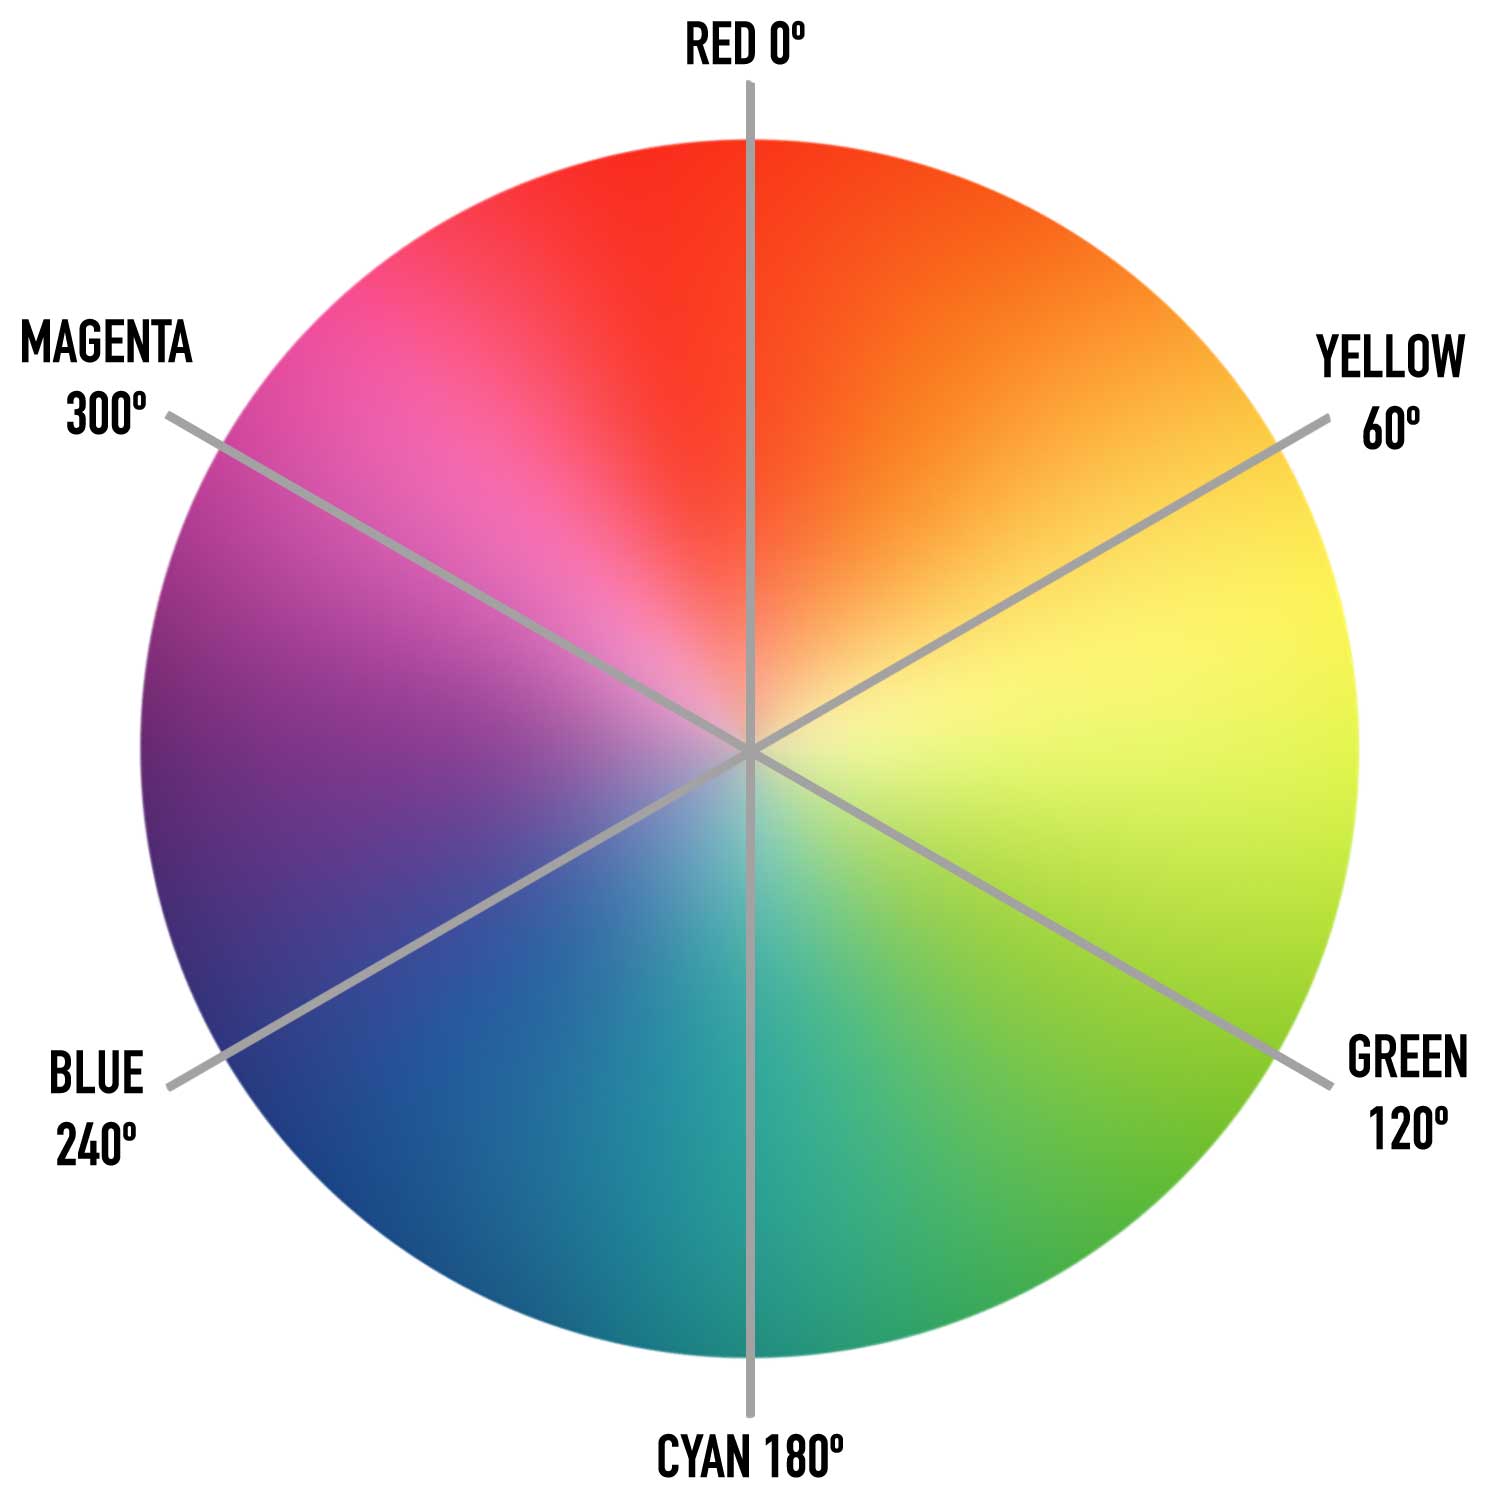 A picture of the HSL color wheel